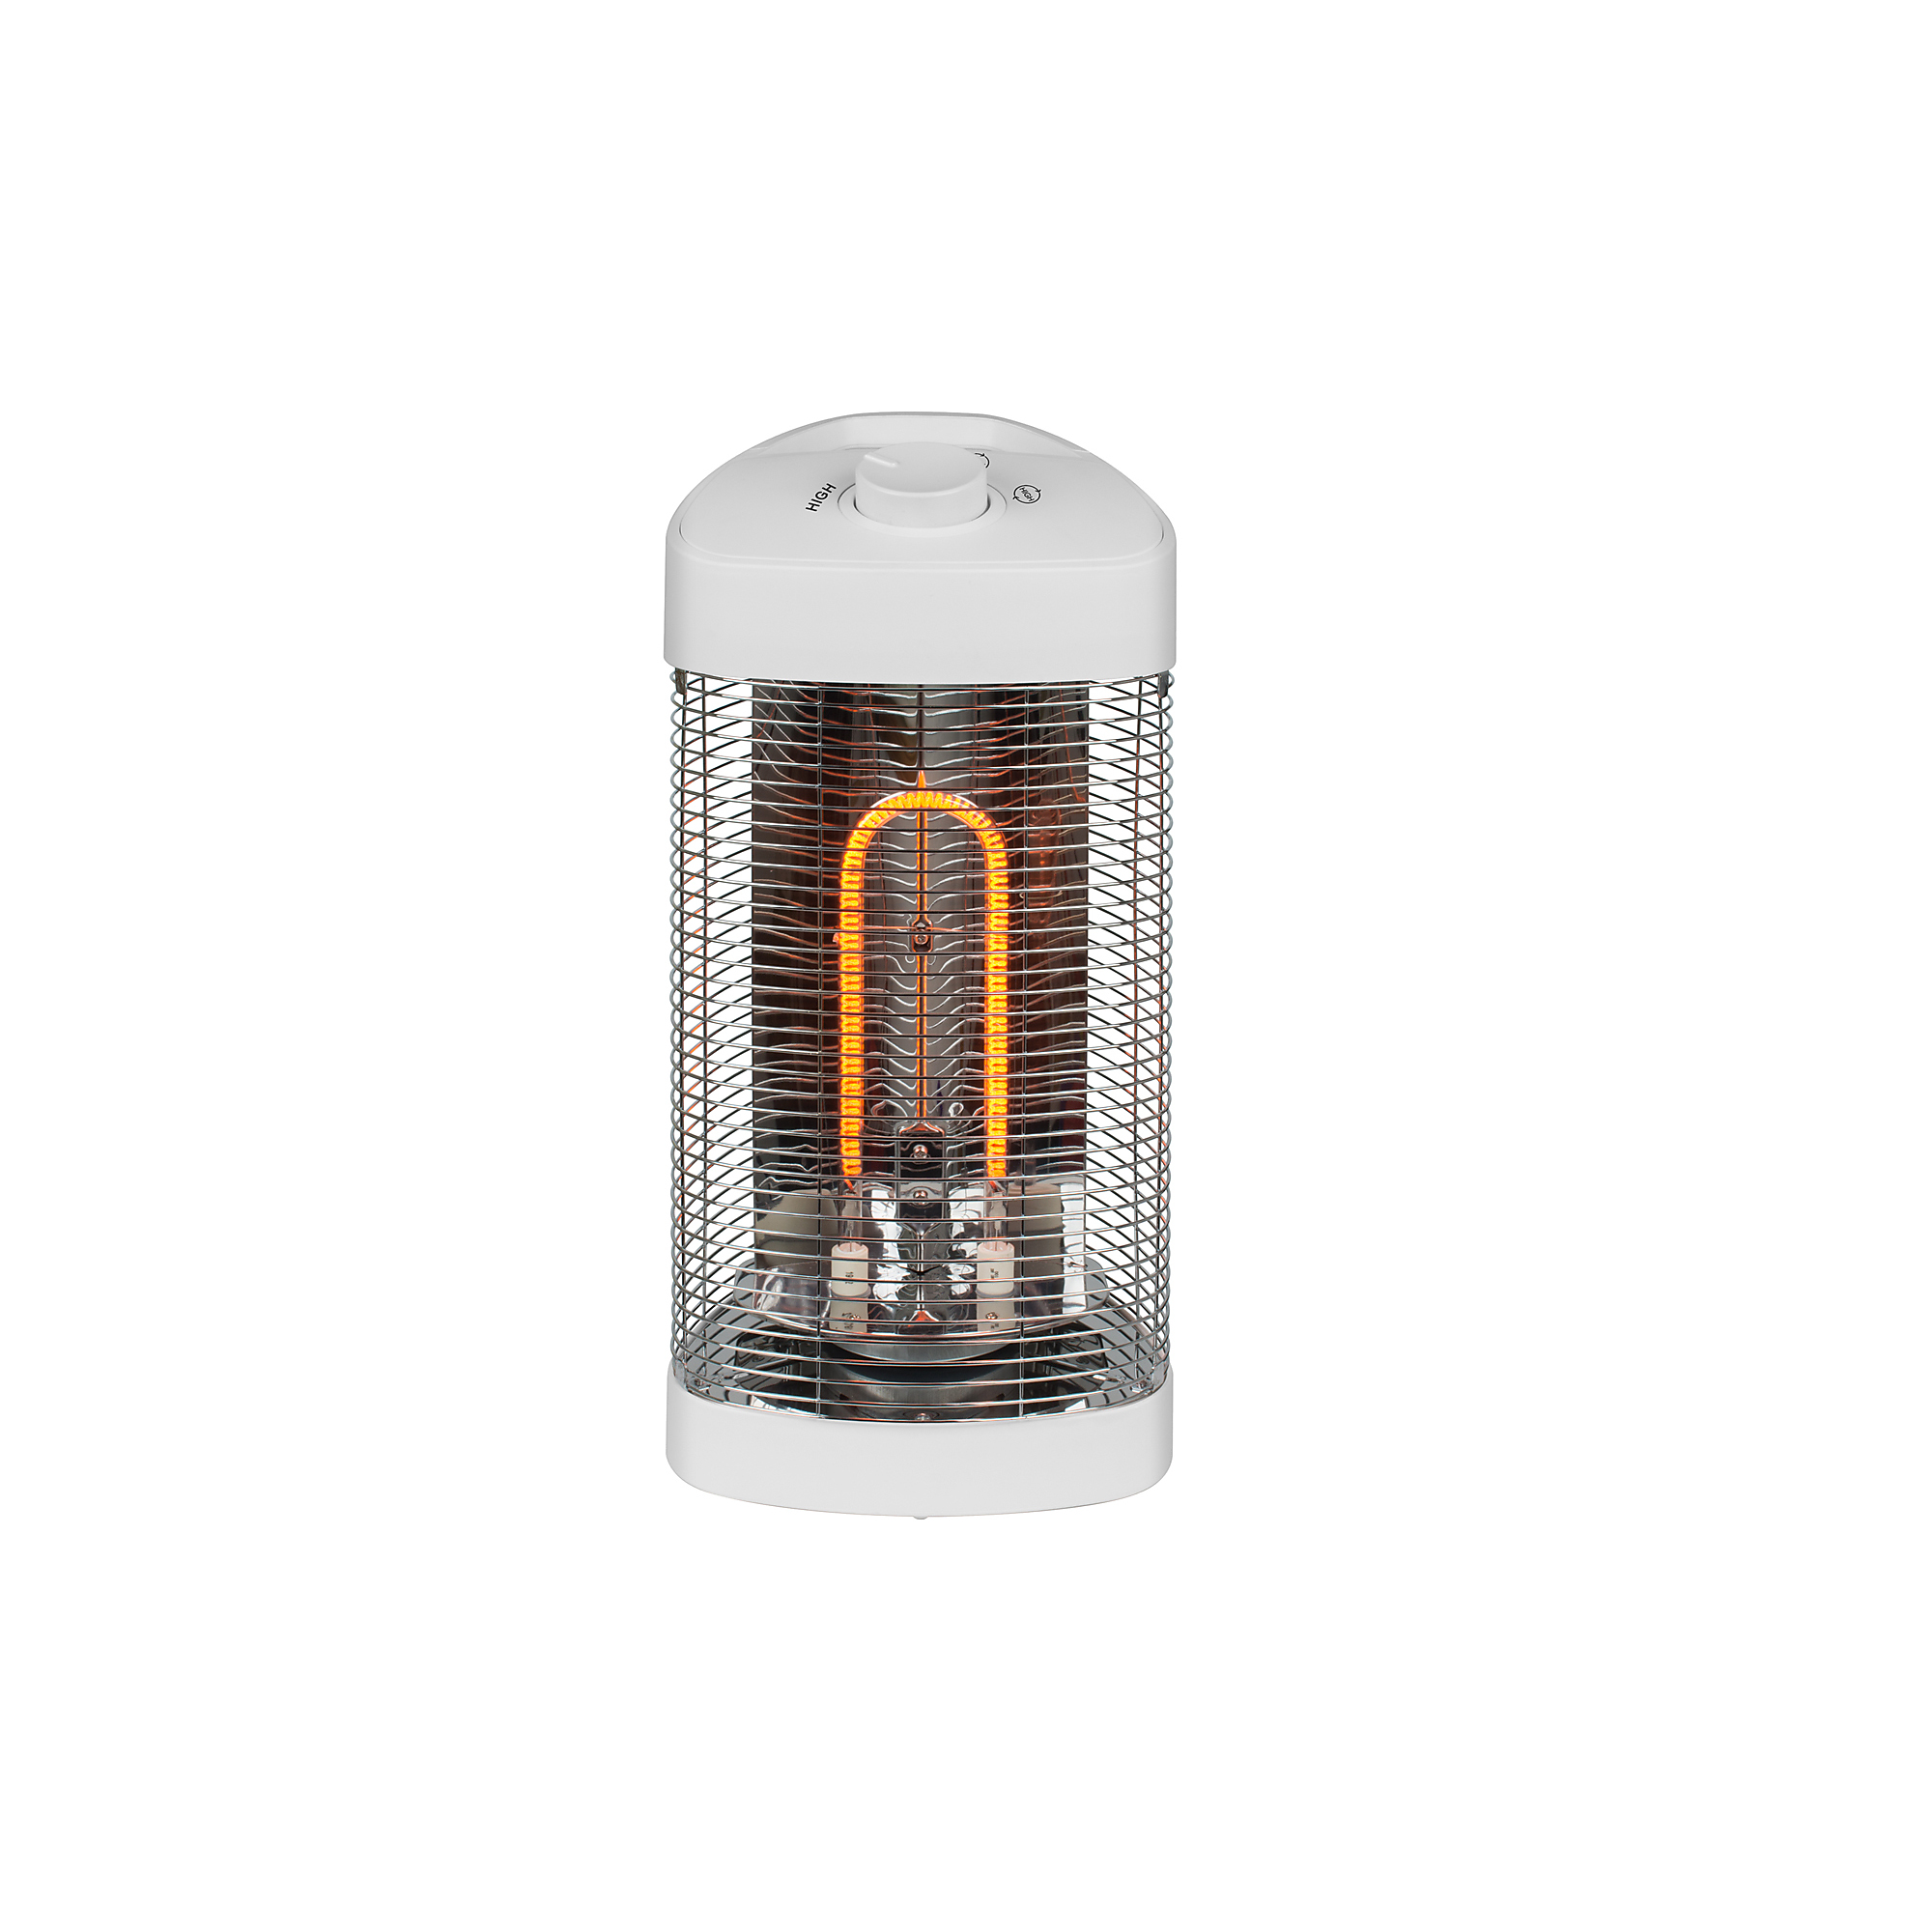 Westinghouse, Portable Oscillating Patio Heater, Model WES31-1200MWHT